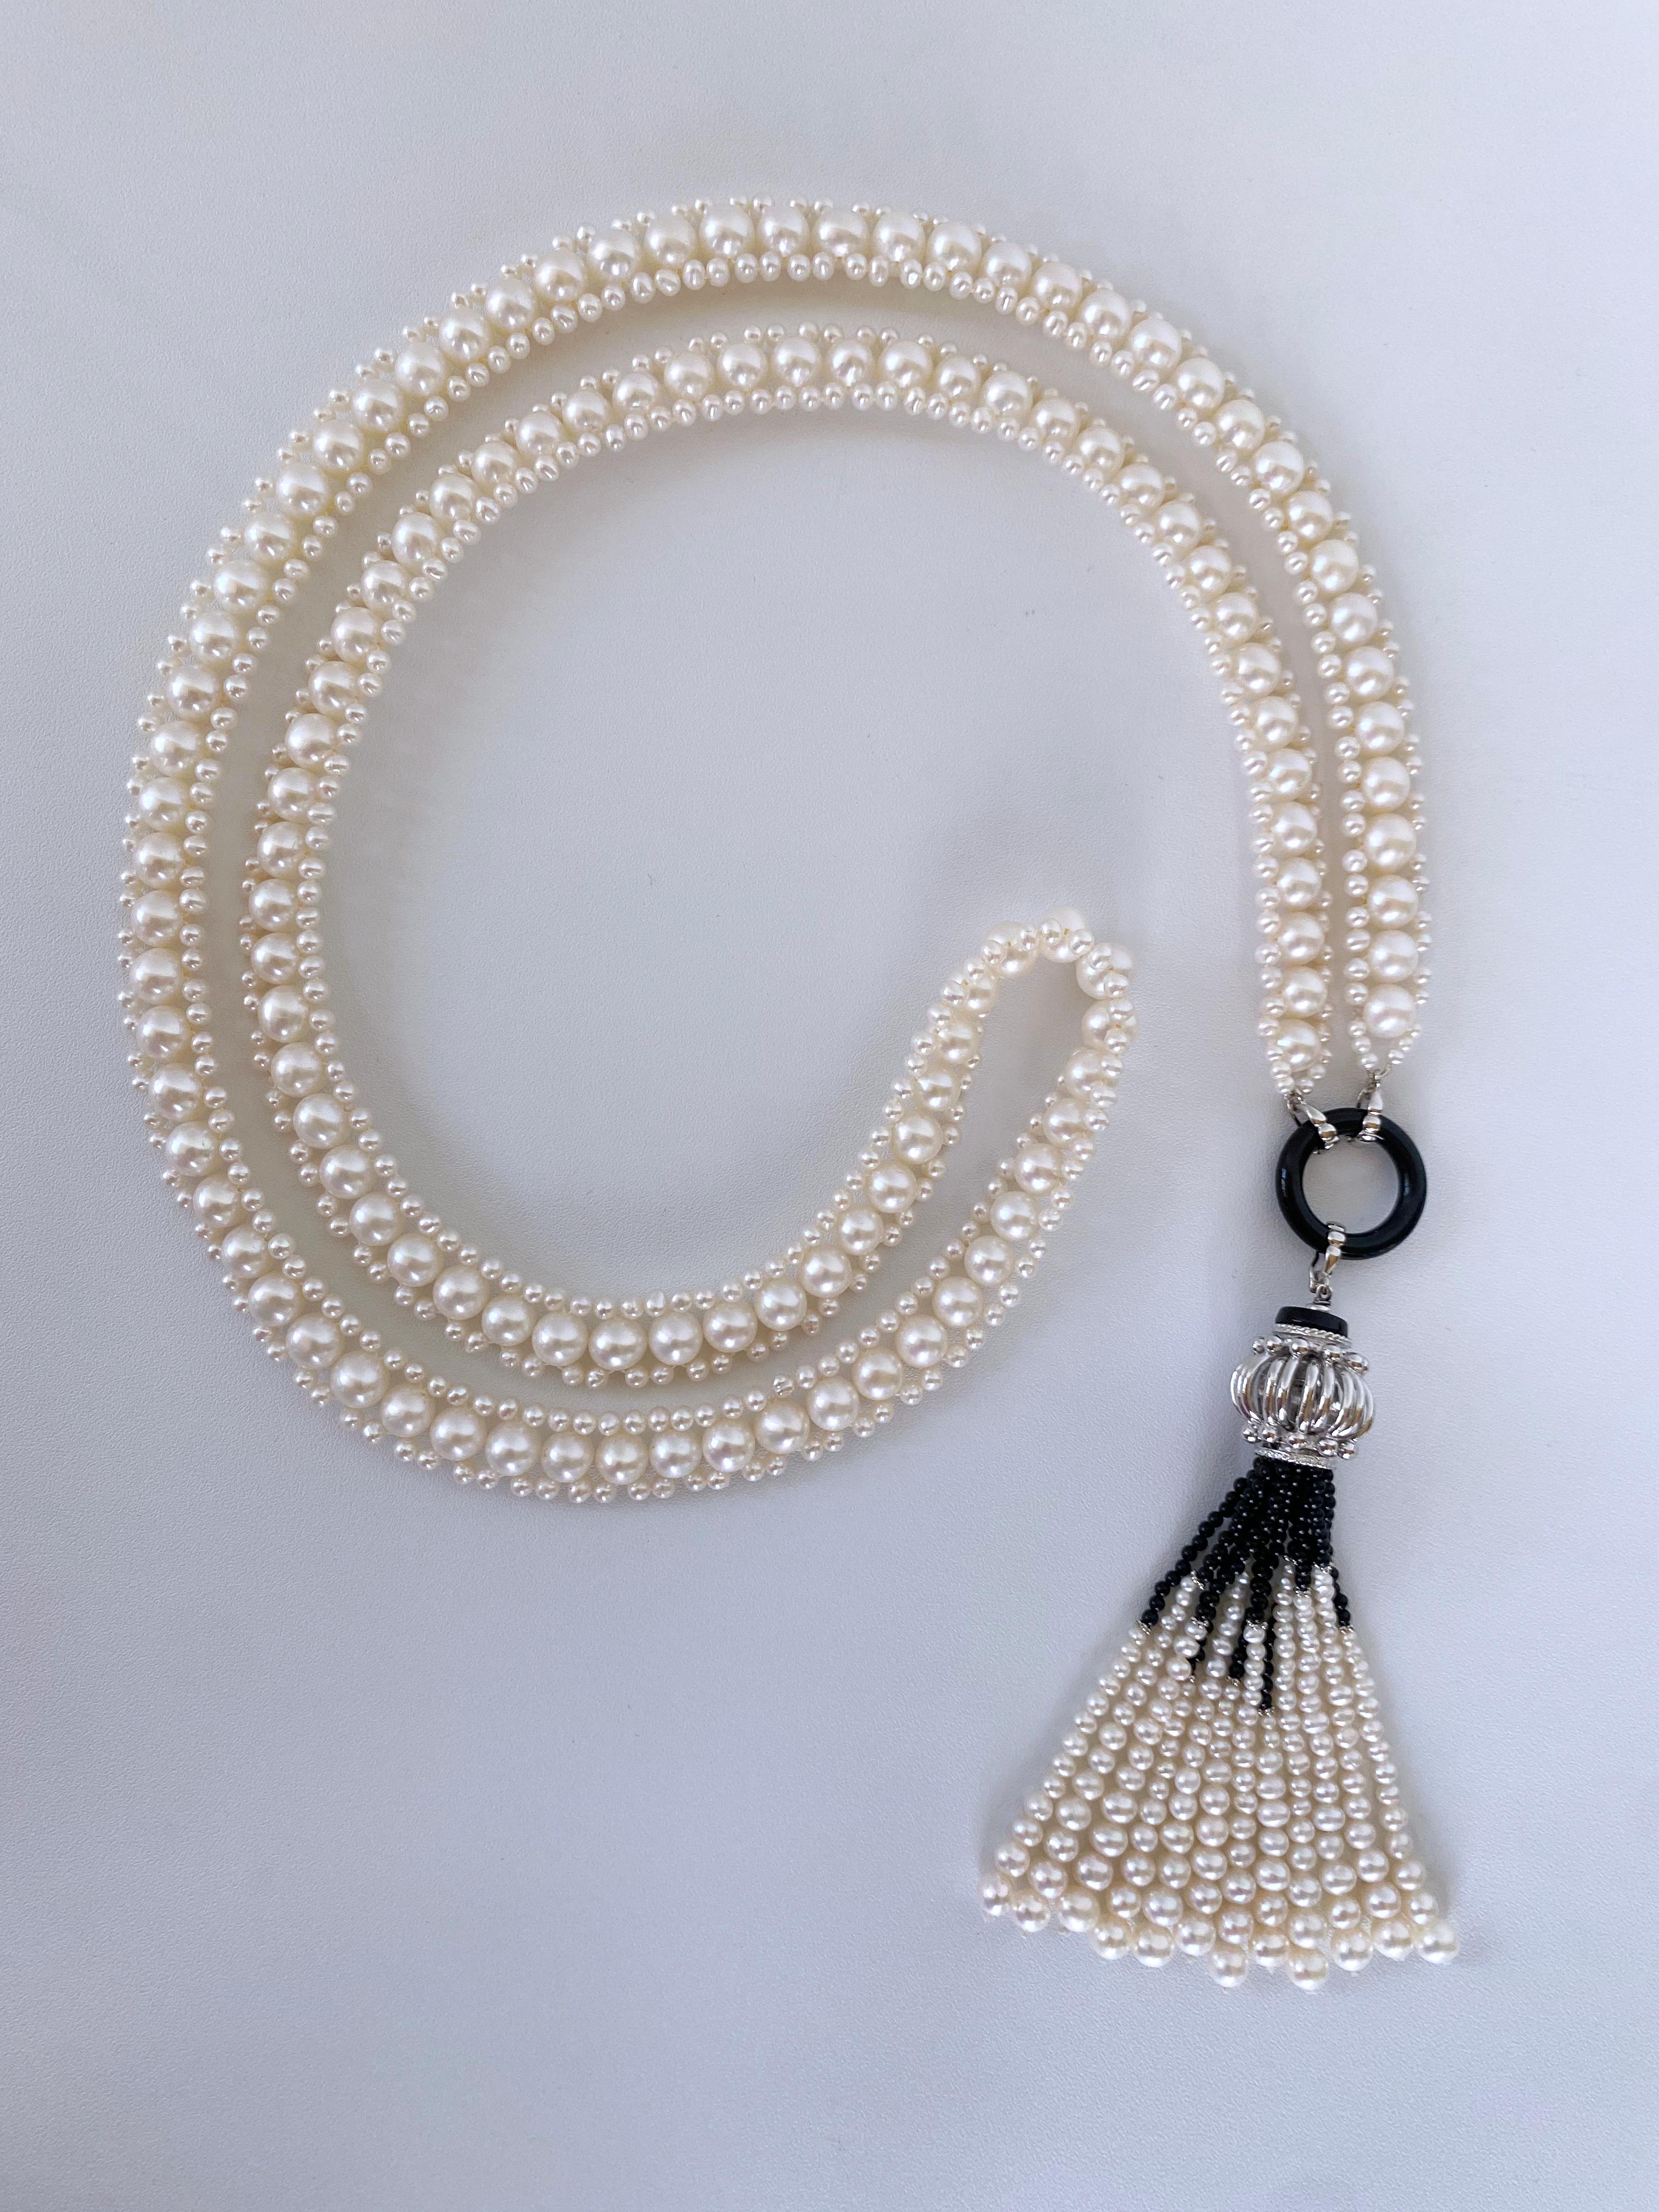 Hand woven piece by Marina J. This stunning Sautoir is made using all White Pearls which feature a wonderful luster and sheen, woven together into a classic design. Measuring 38 inches long sans Tassel, each end of this Sautoir meets at decorative